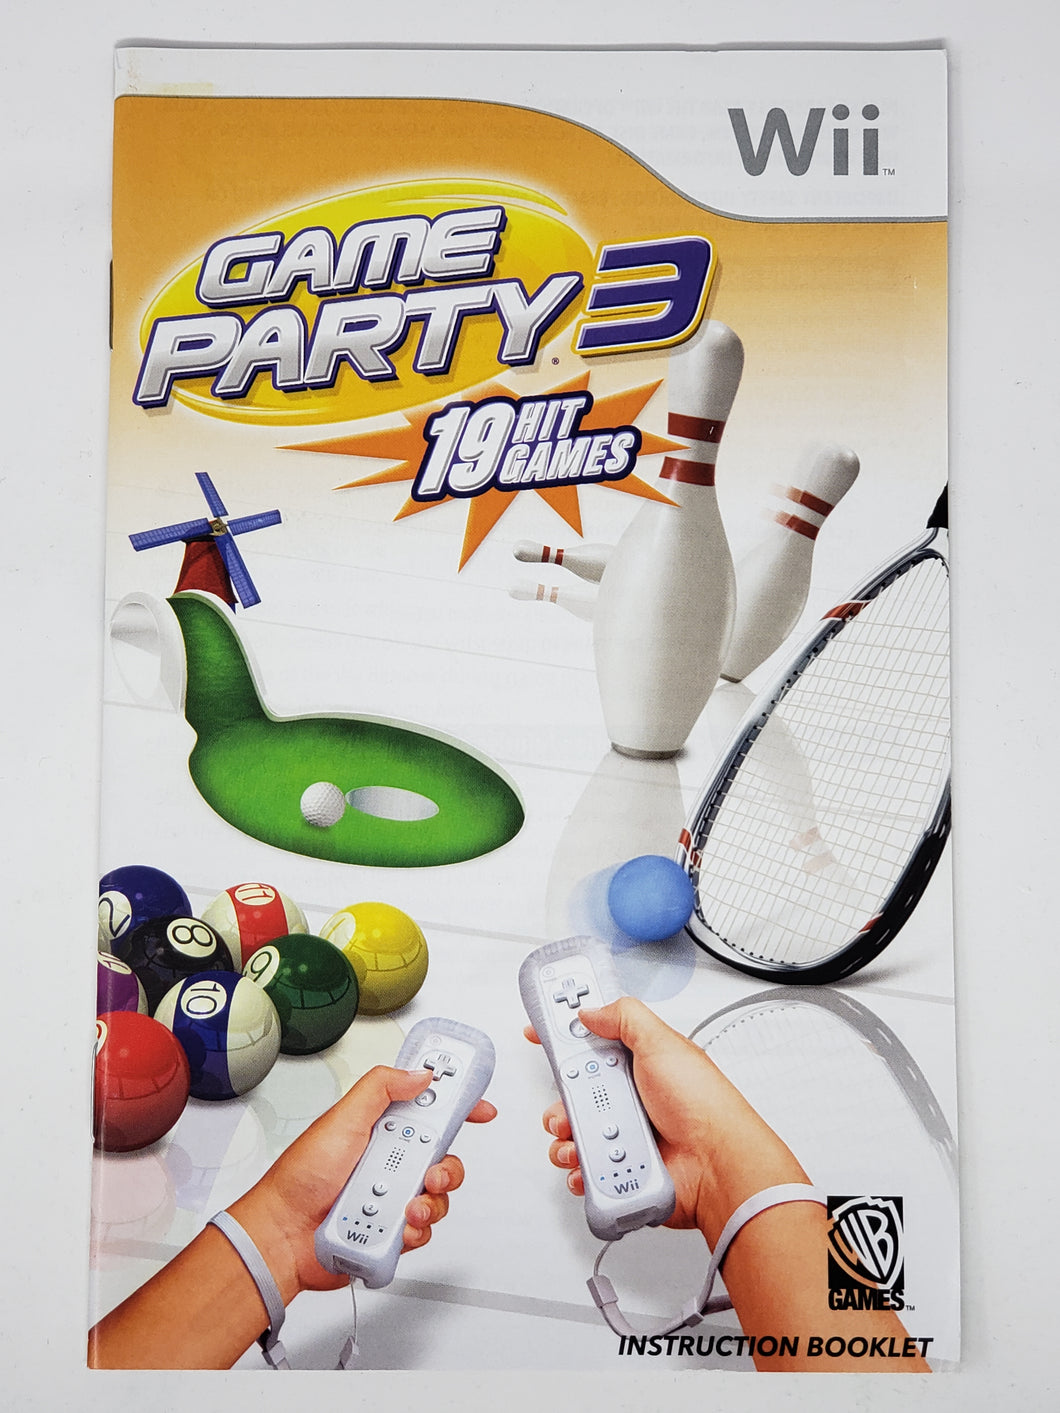 Game Party 3 [manuel] - Nintendo Wii